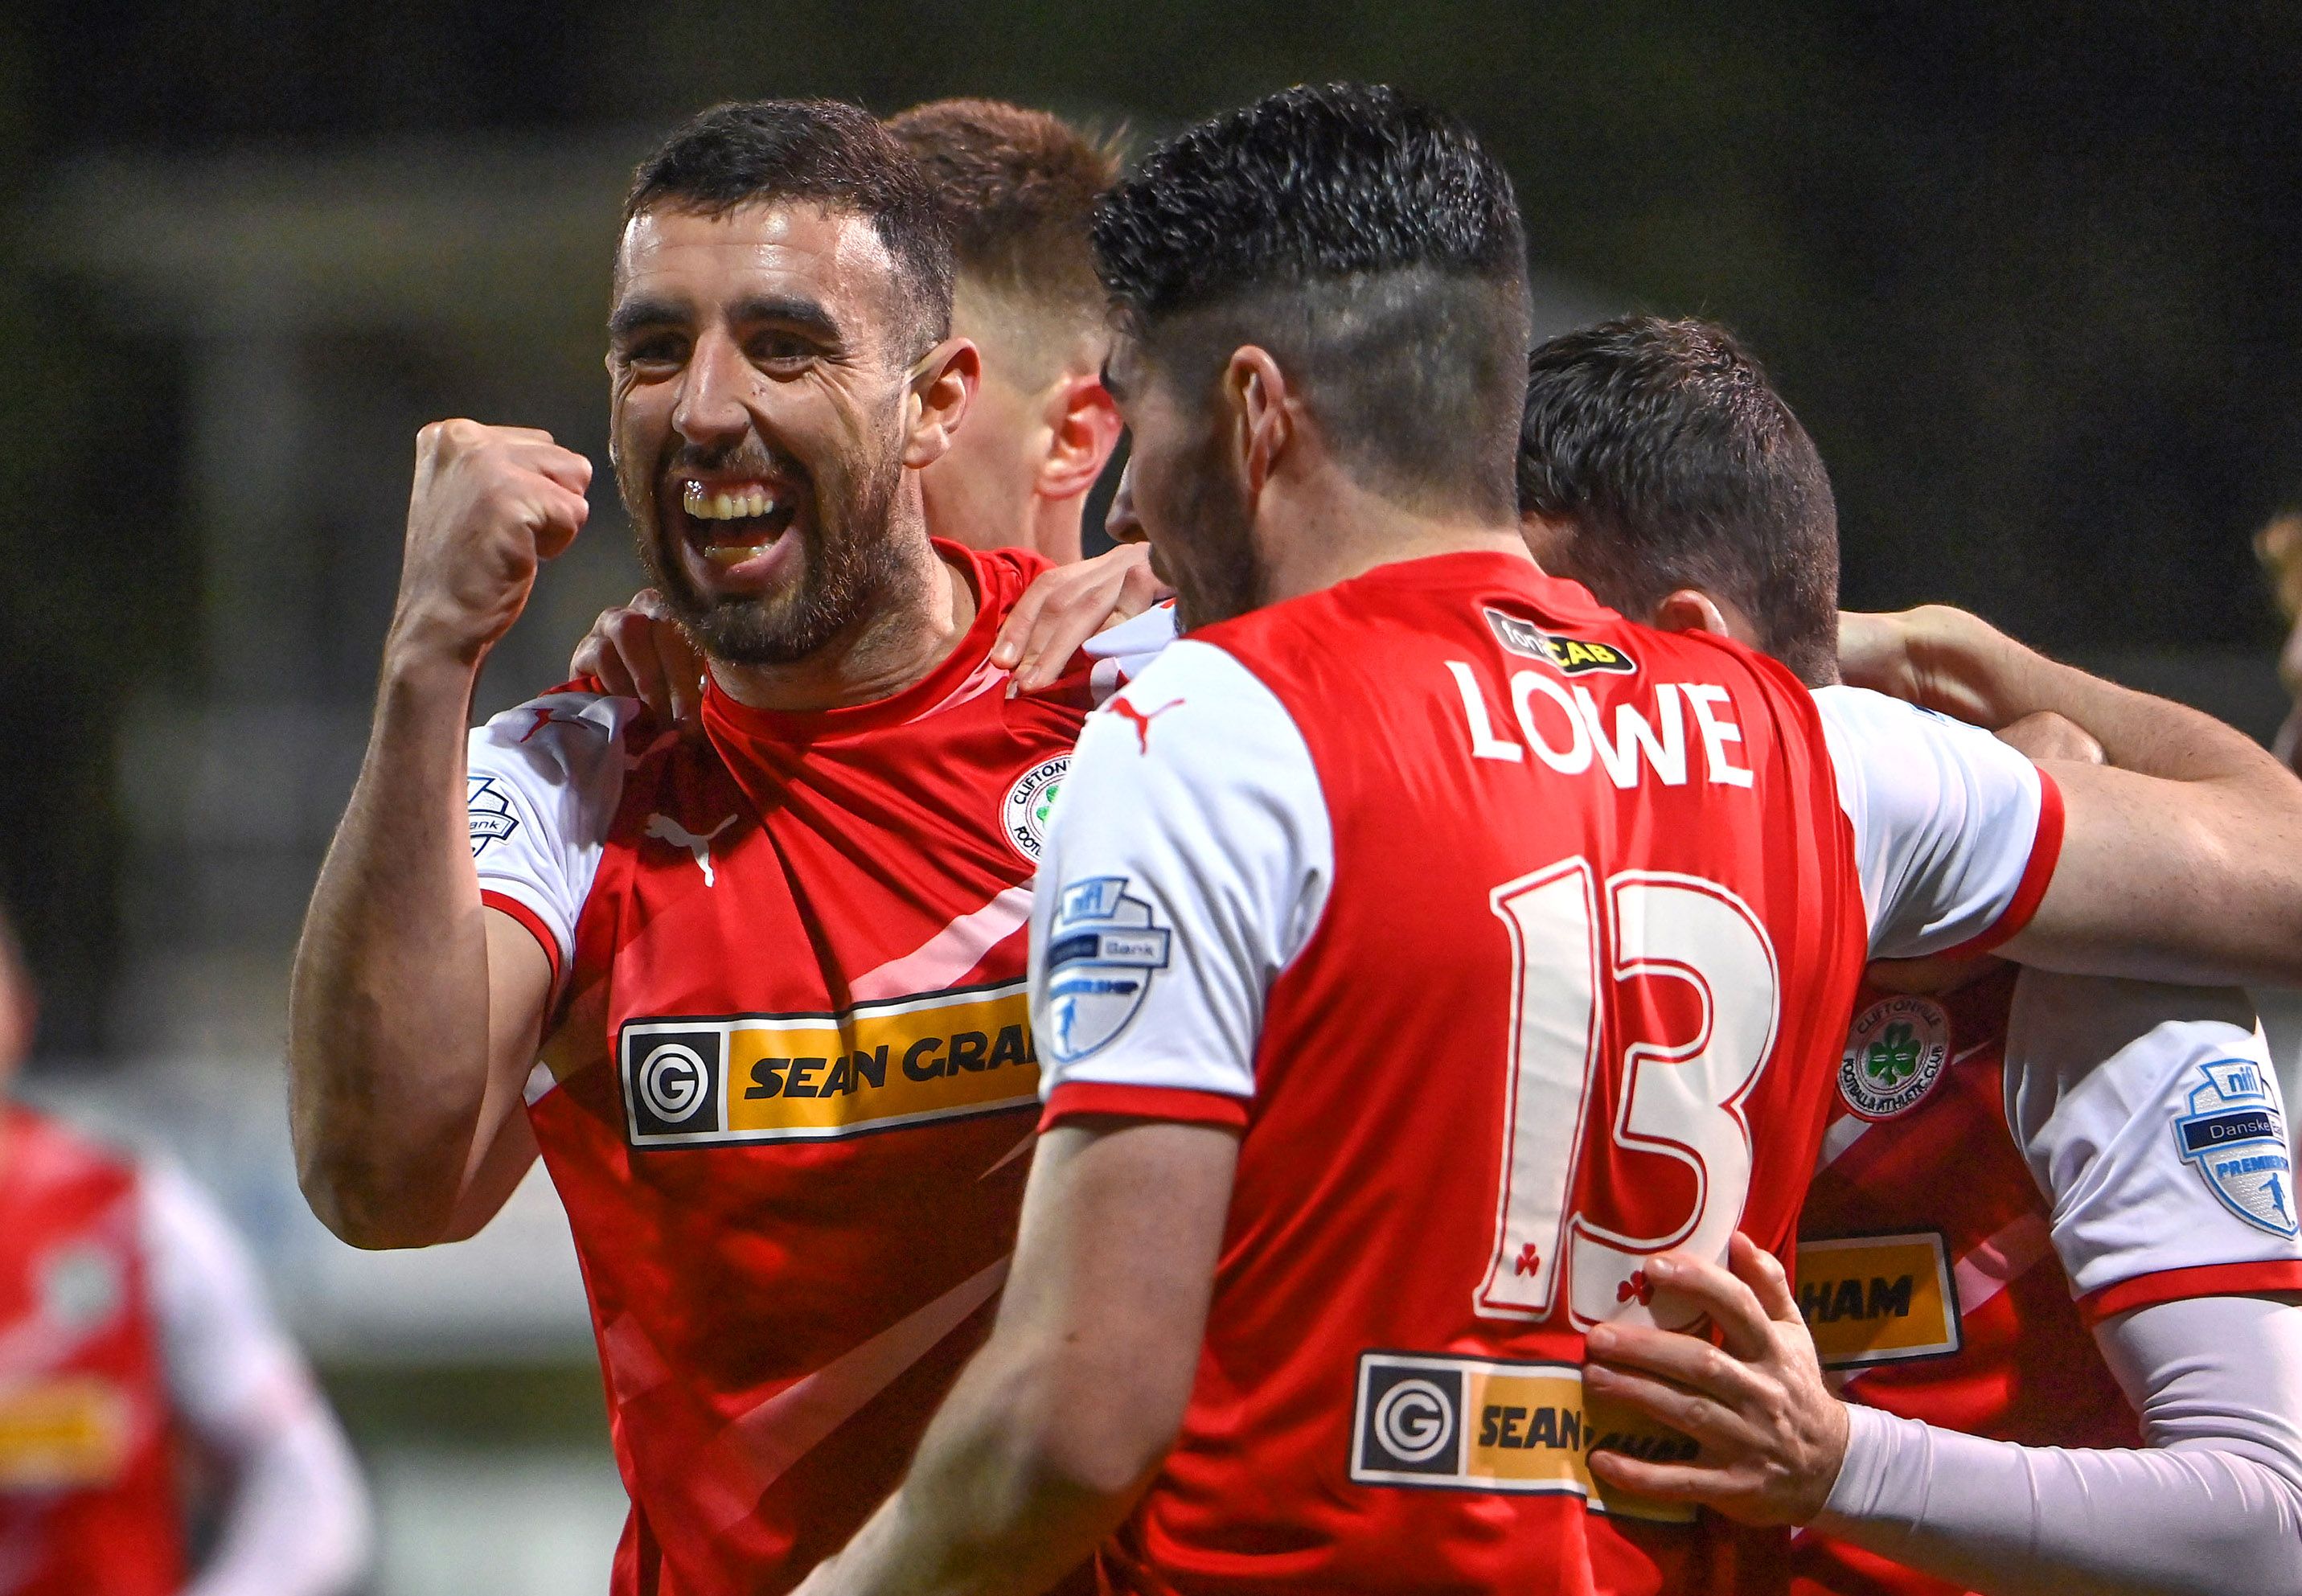 Paddy McLaughlin believes Joe Gormley was right to claim the hat-trick on Tuesday